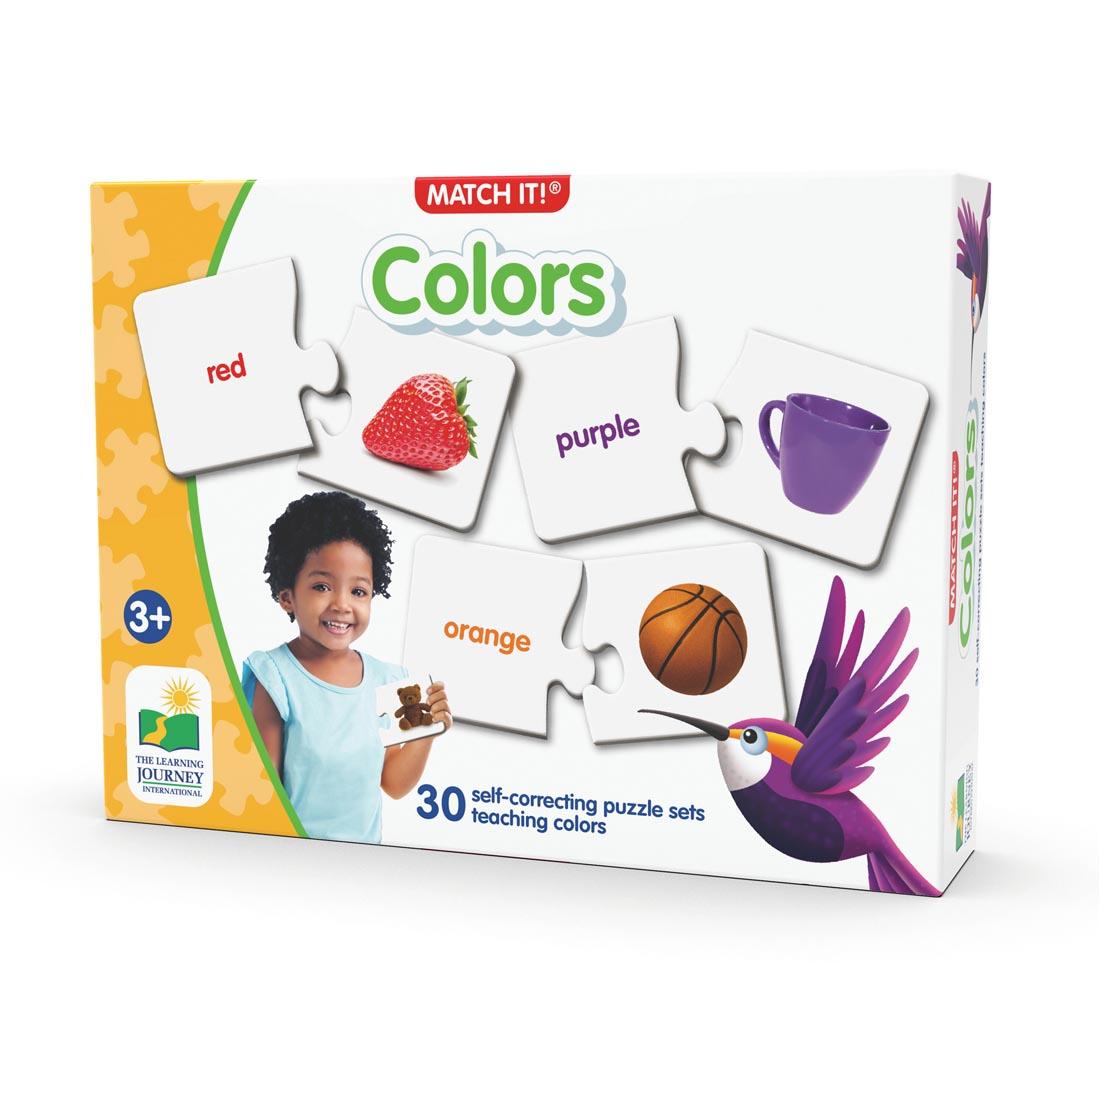 Match It! Colors by The Learning Journey